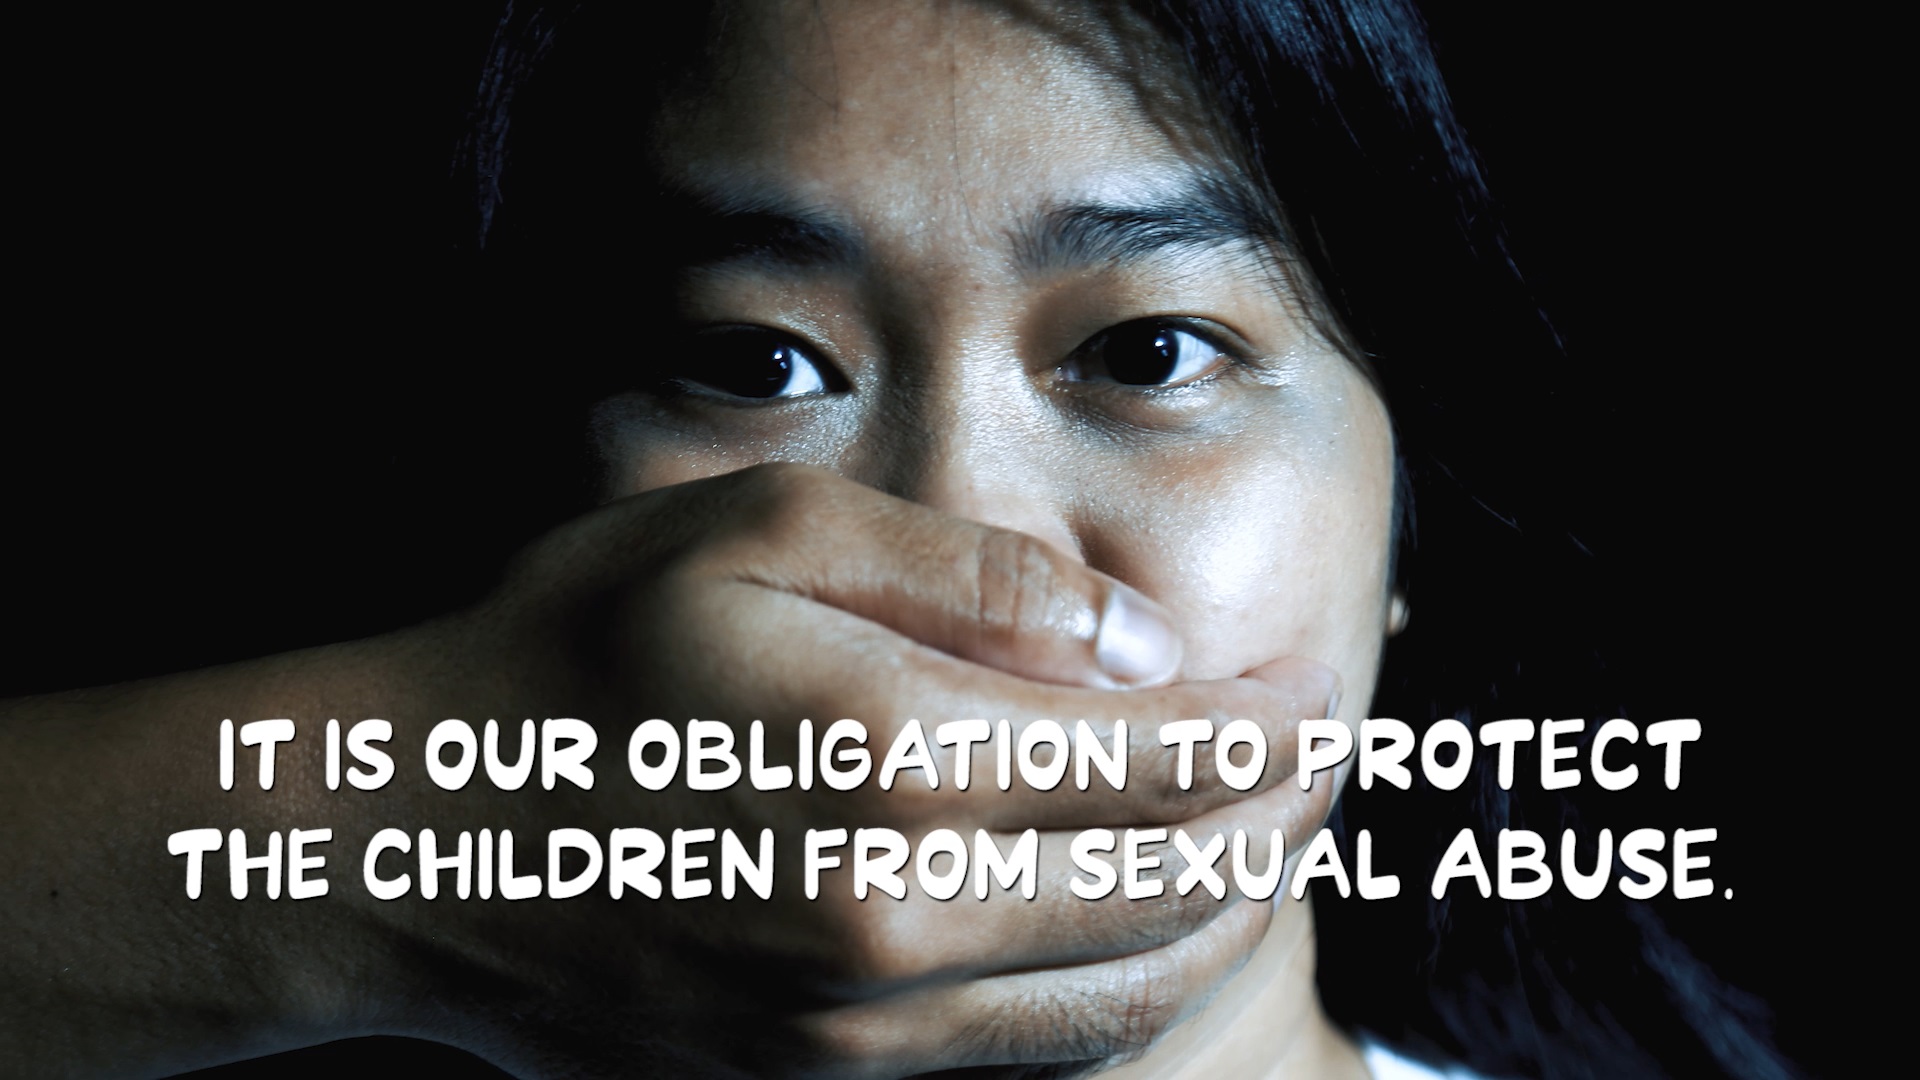 Protect children from sexual abuse and exploitation